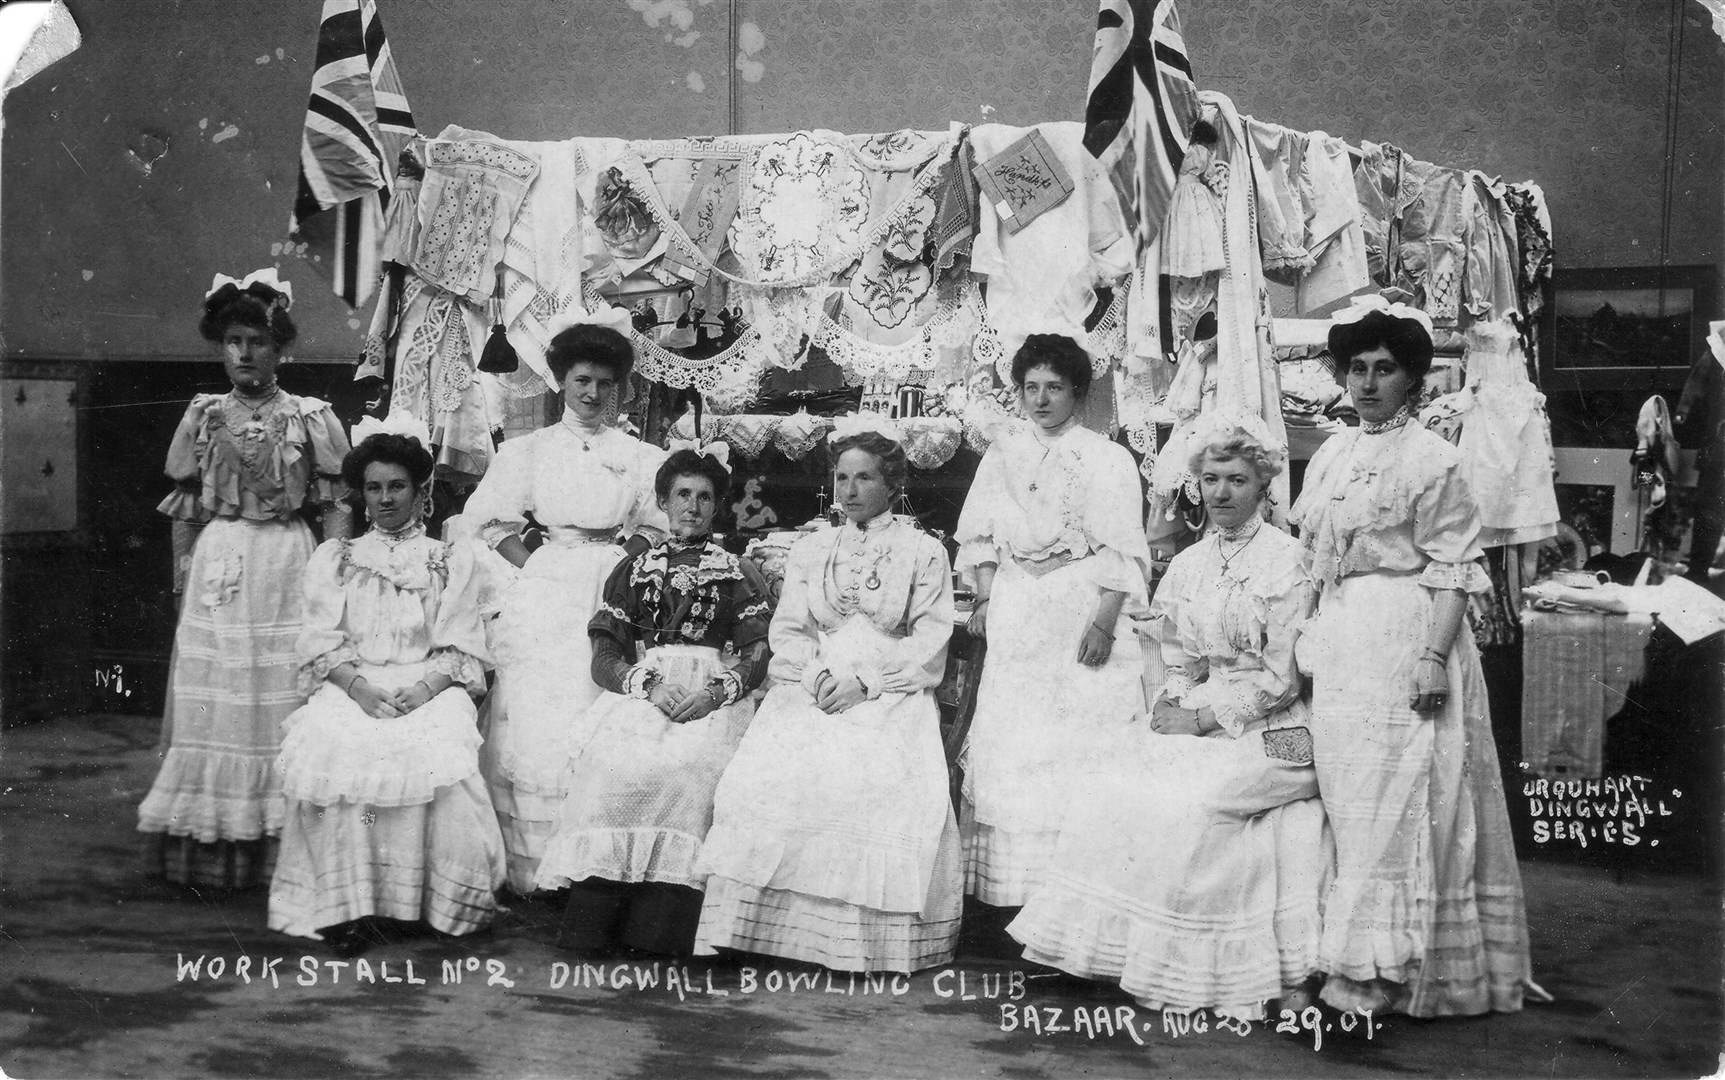 Dingwall Bowling Club Bazzar, ladies at Stall no.2, 28th August 1907. Picture courtesy of Dingwall Museum.